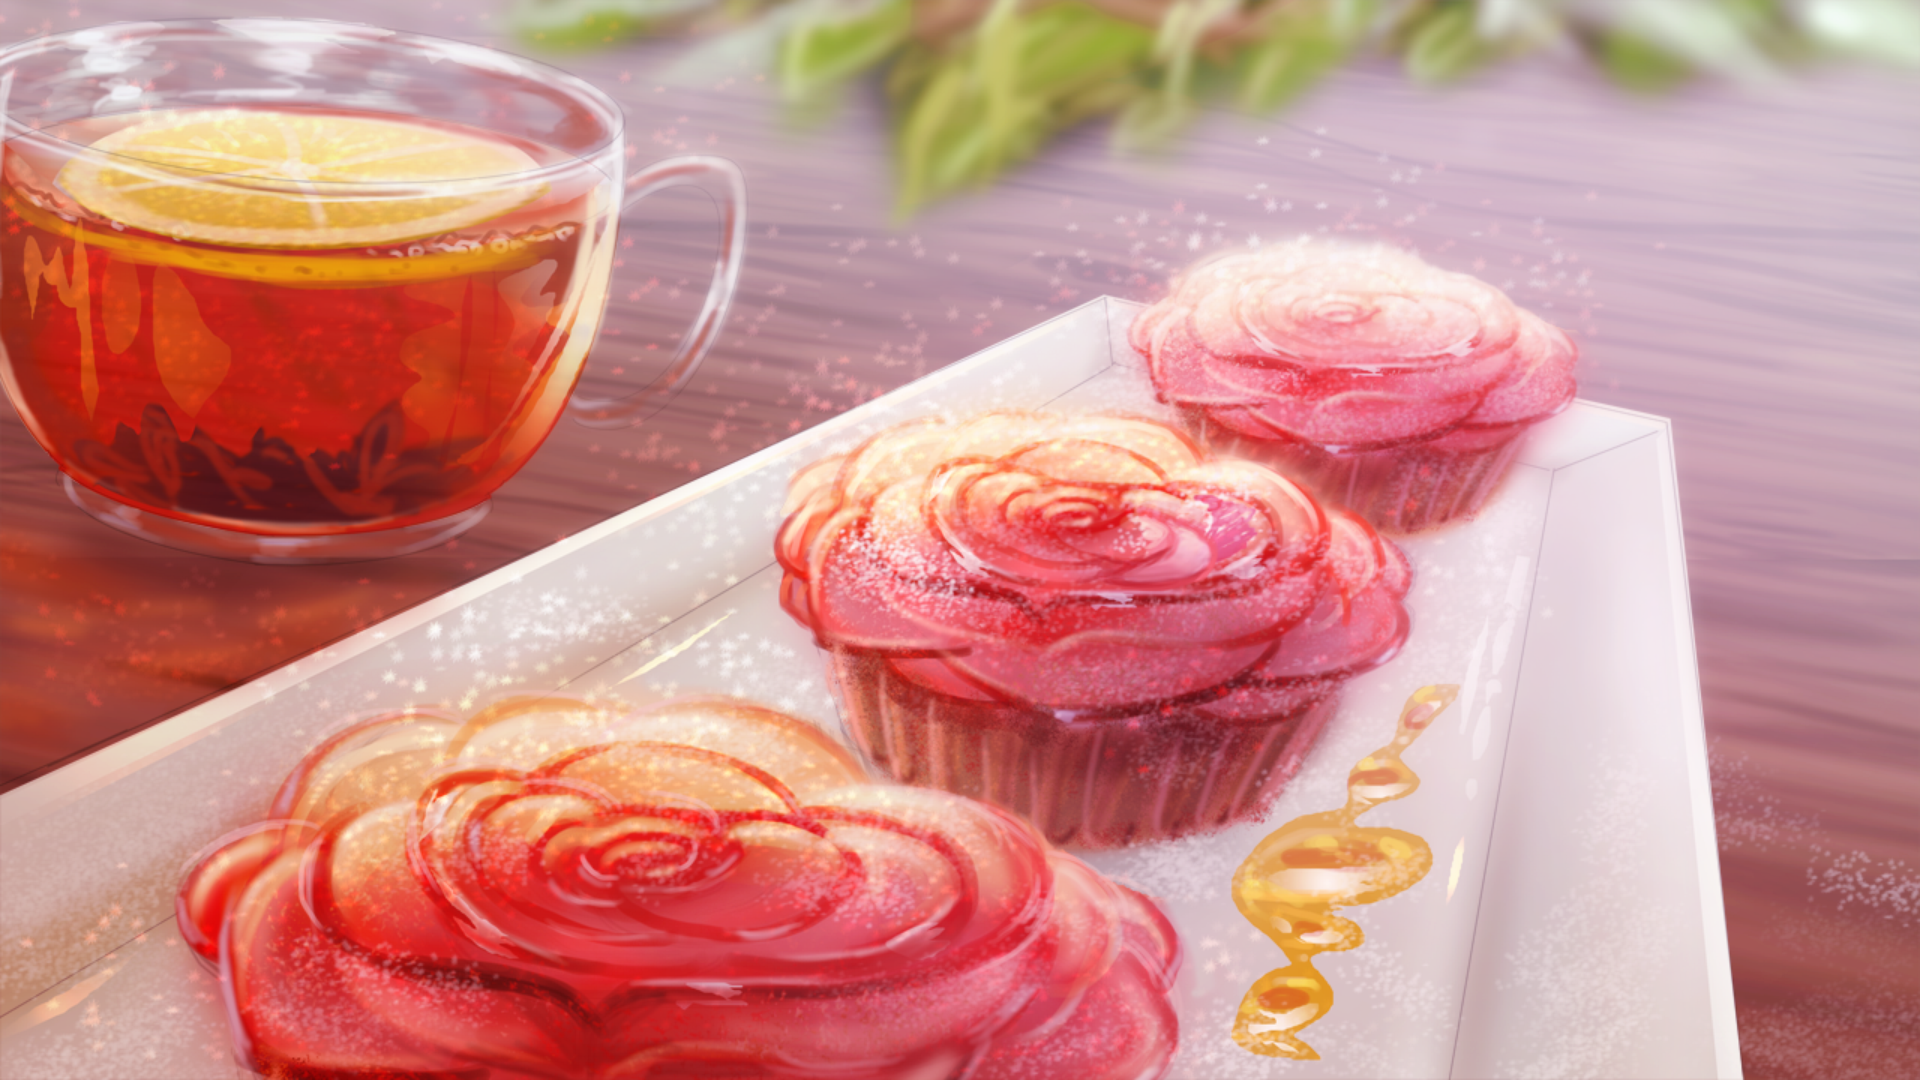 Icon for Apple Rose Tarts